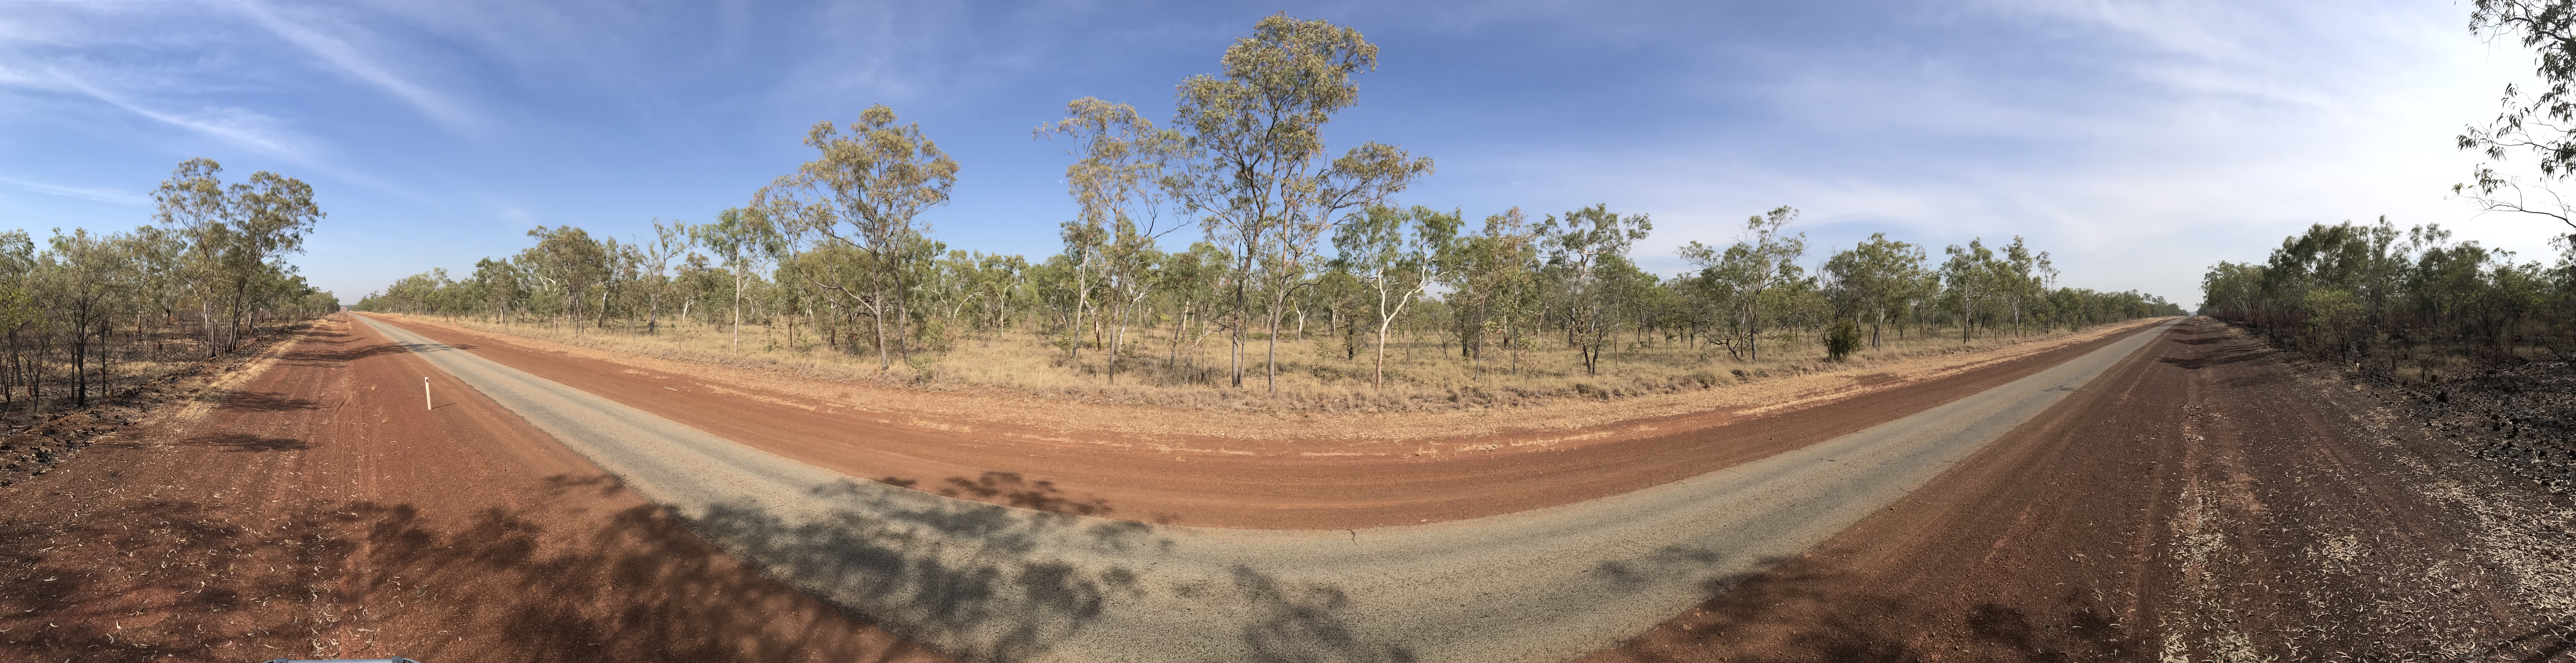 Travelling on NT roads